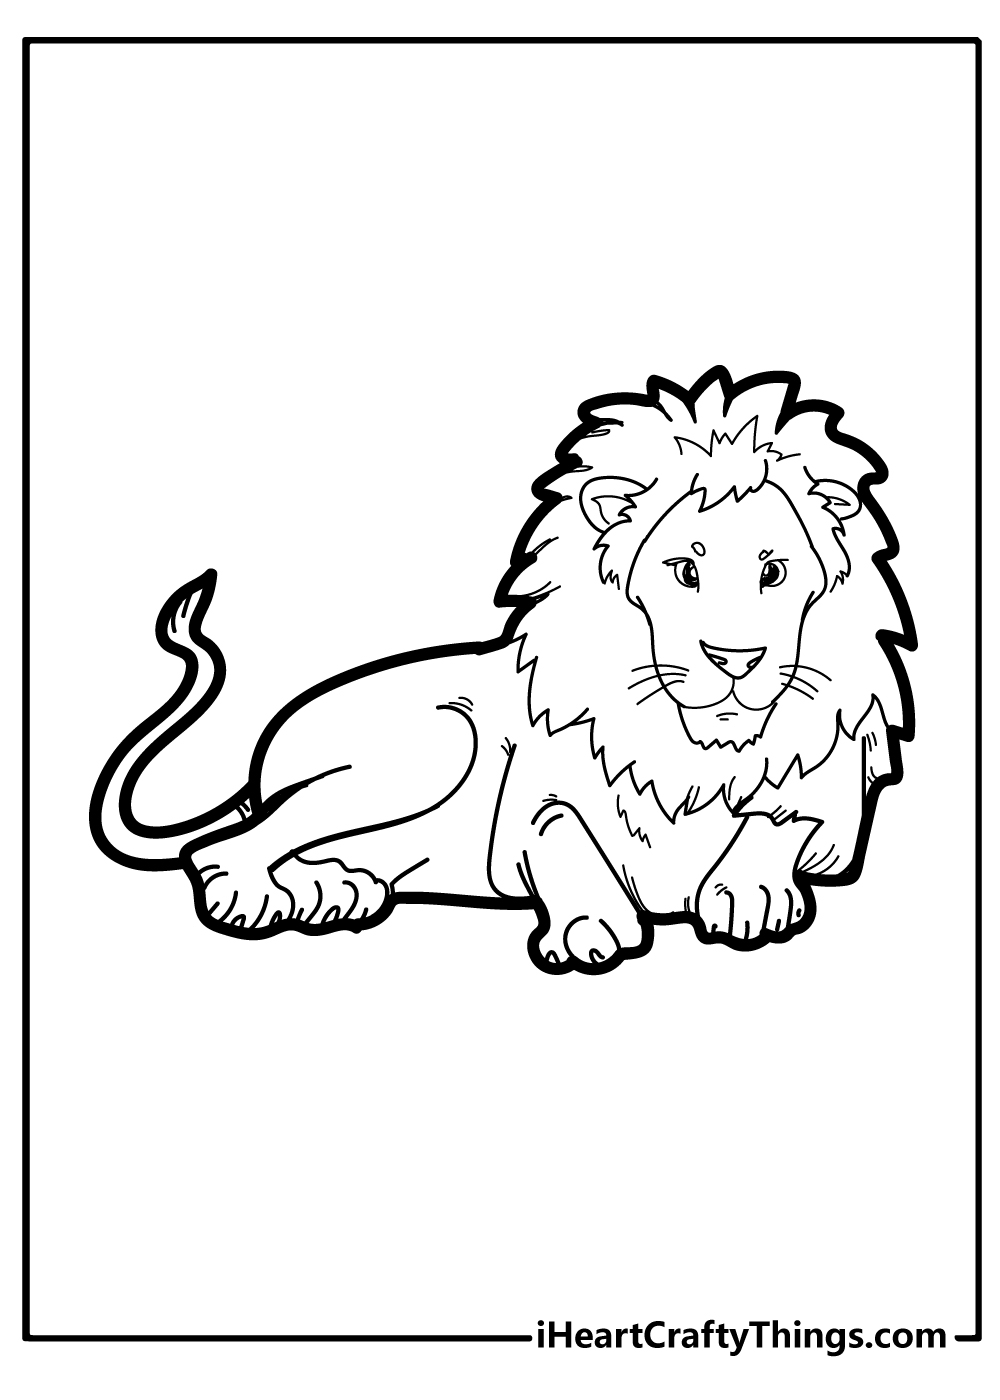 Lion coloring pages free printables